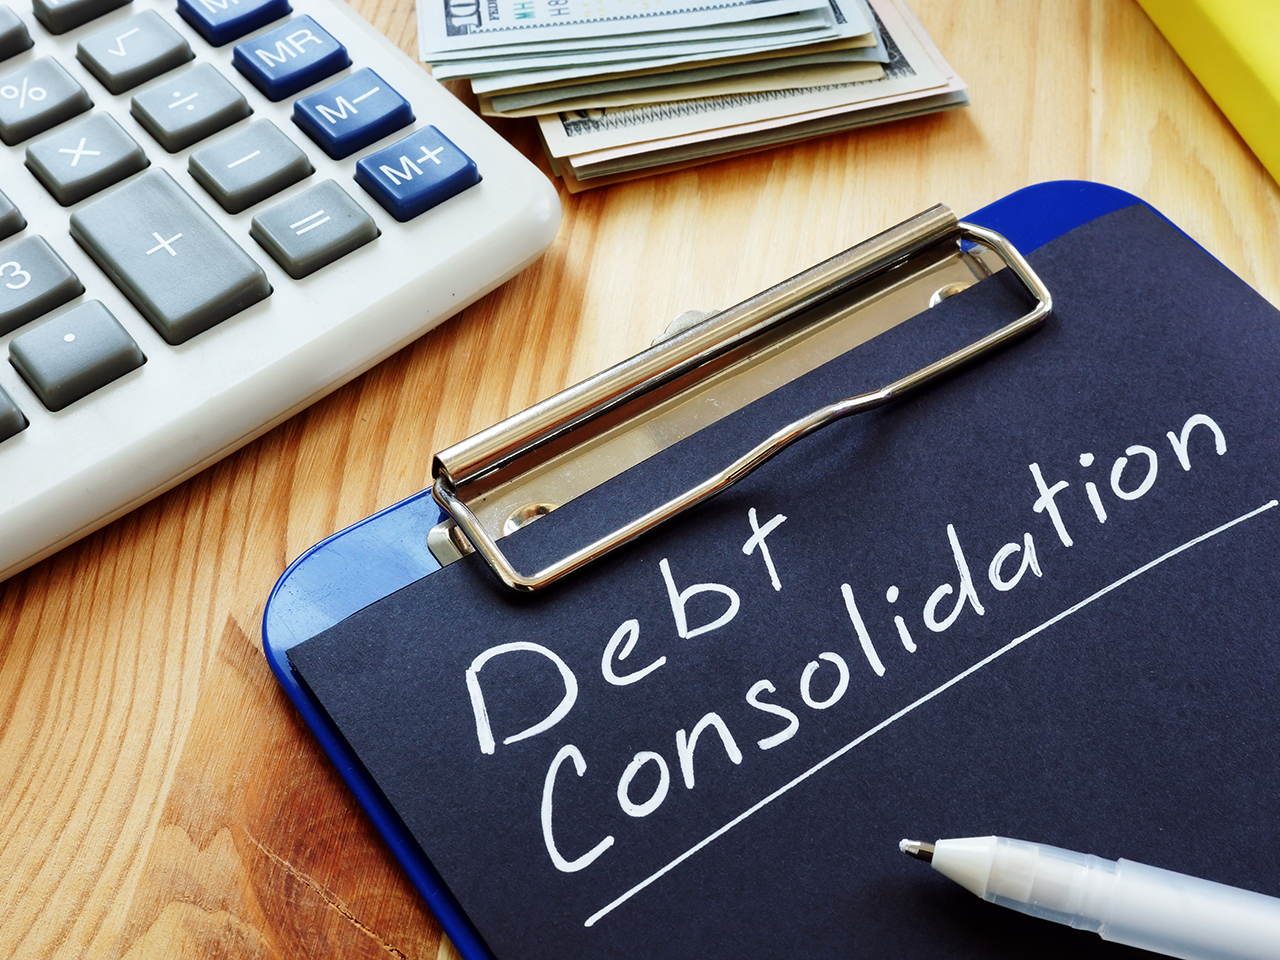 https://apmortgagesolutions.co.uk/wp-content/uploads/2021/07/debt-consolidation.jpg